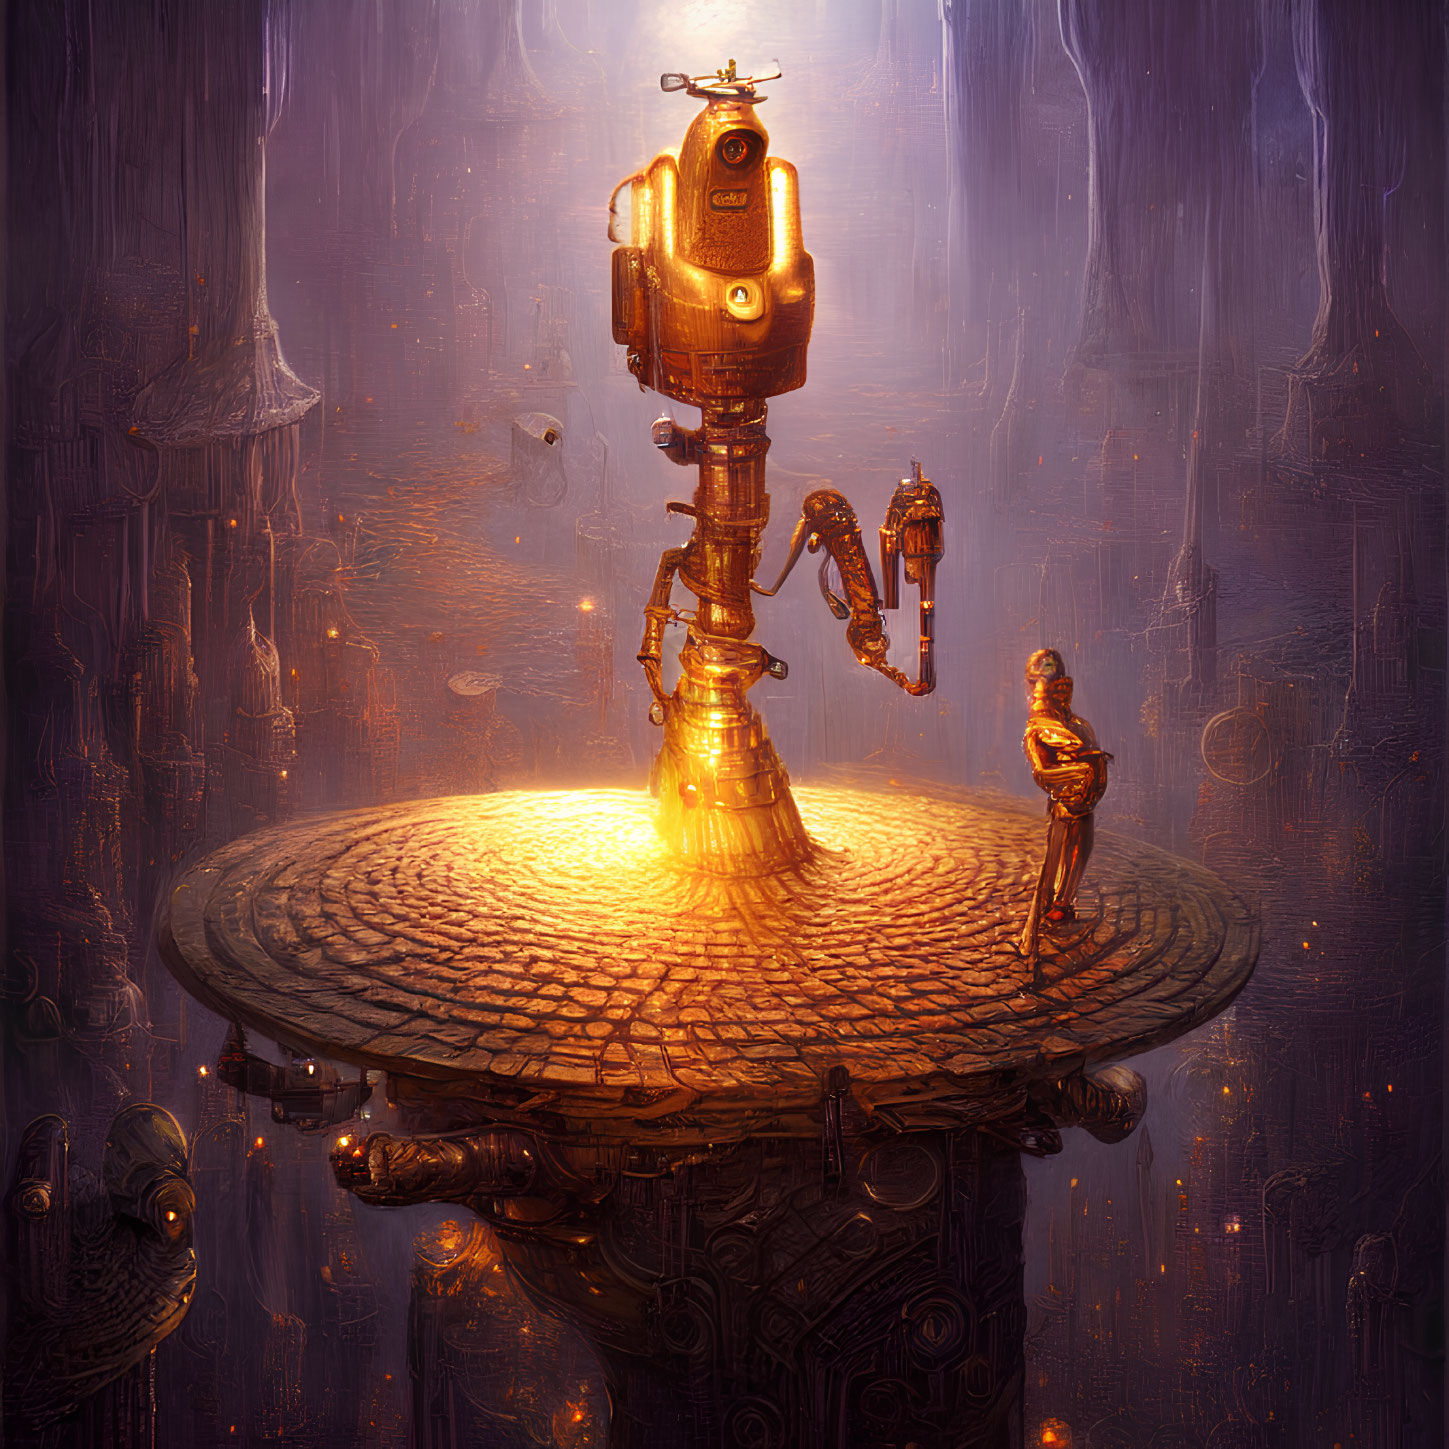 Ornate glowing robotic figure reaching out to humanoid robot in mystical environment